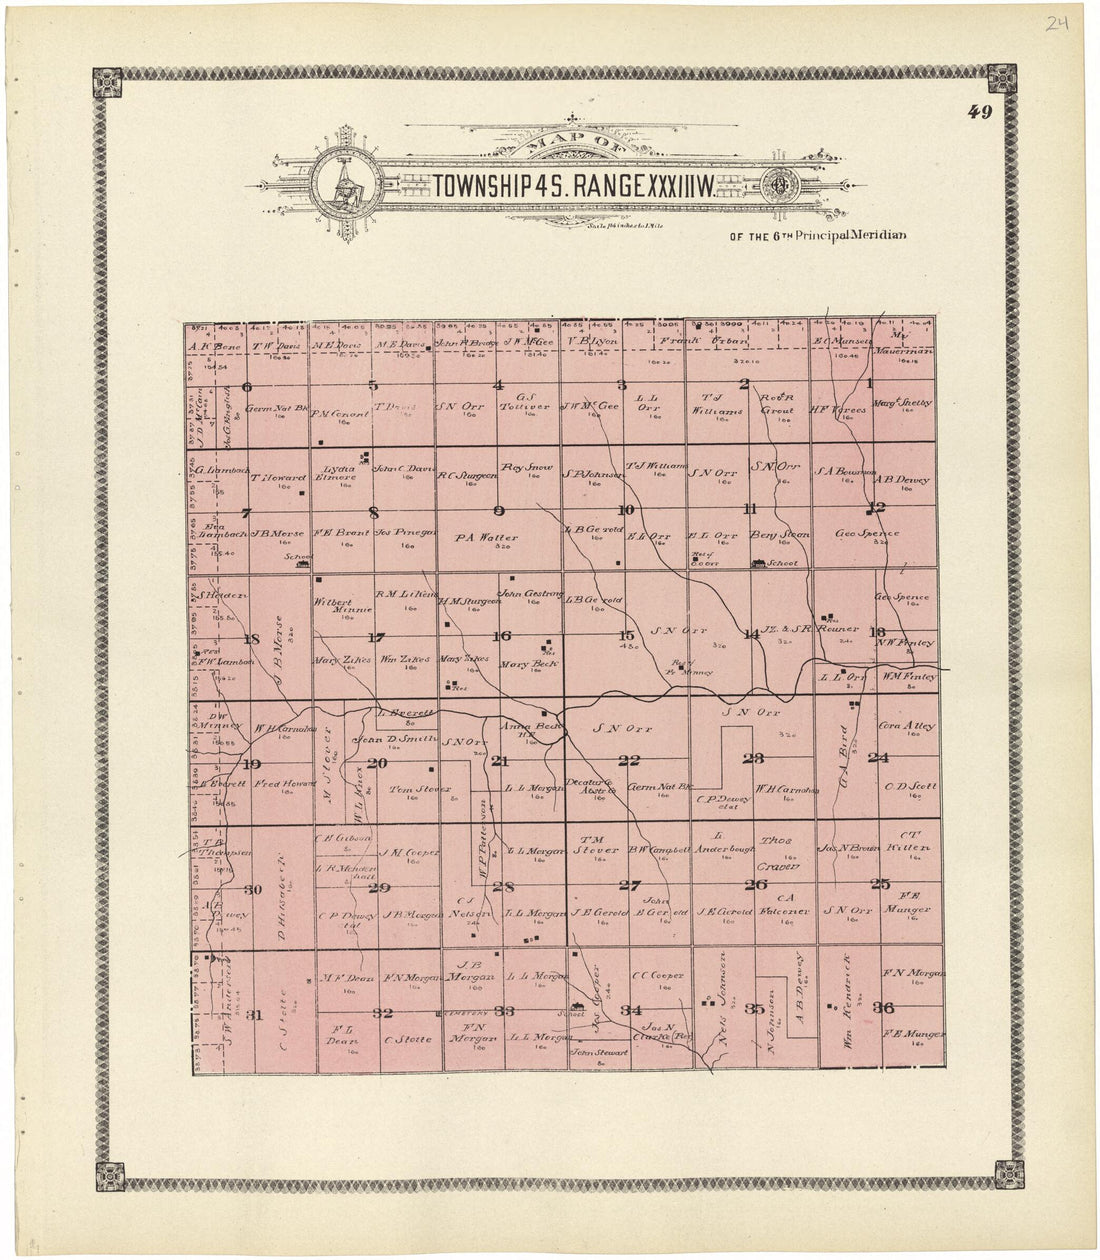 This old map of Map of Township 4 S. Range XXXIII W. from Standard Atlas of Rawlins County, Kansas from 1906 was created by  Geo. A. Ogle &amp; Co in 1906